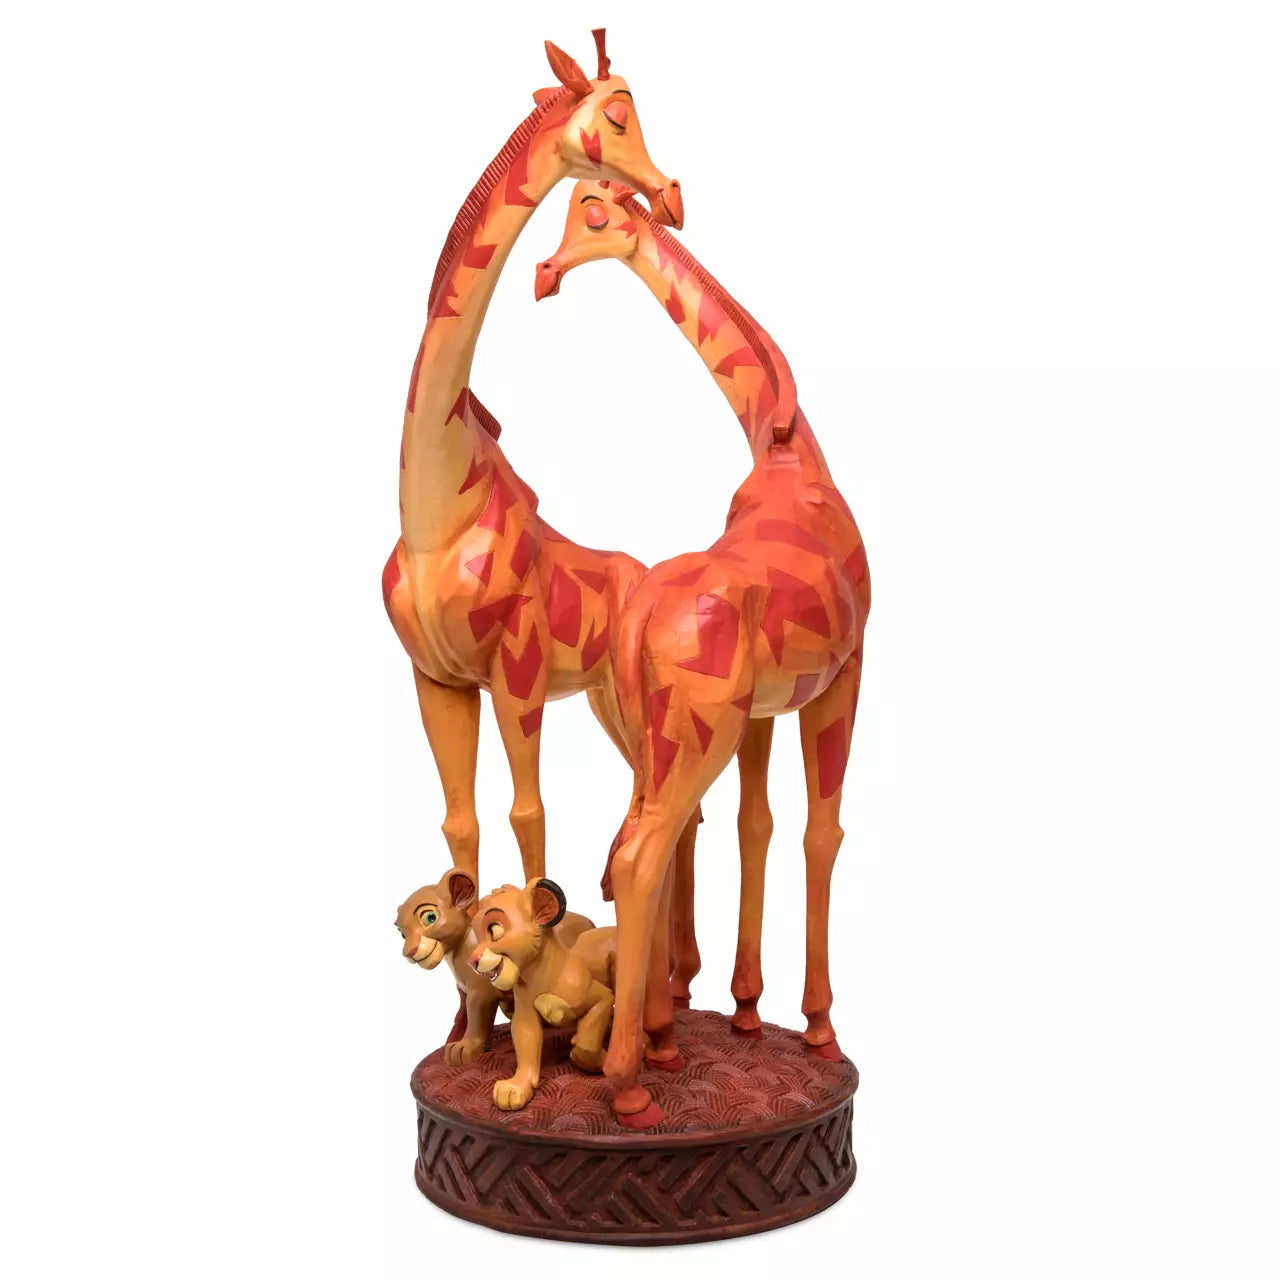 The Lion King 25th Anniversary Figure – Limited Edition